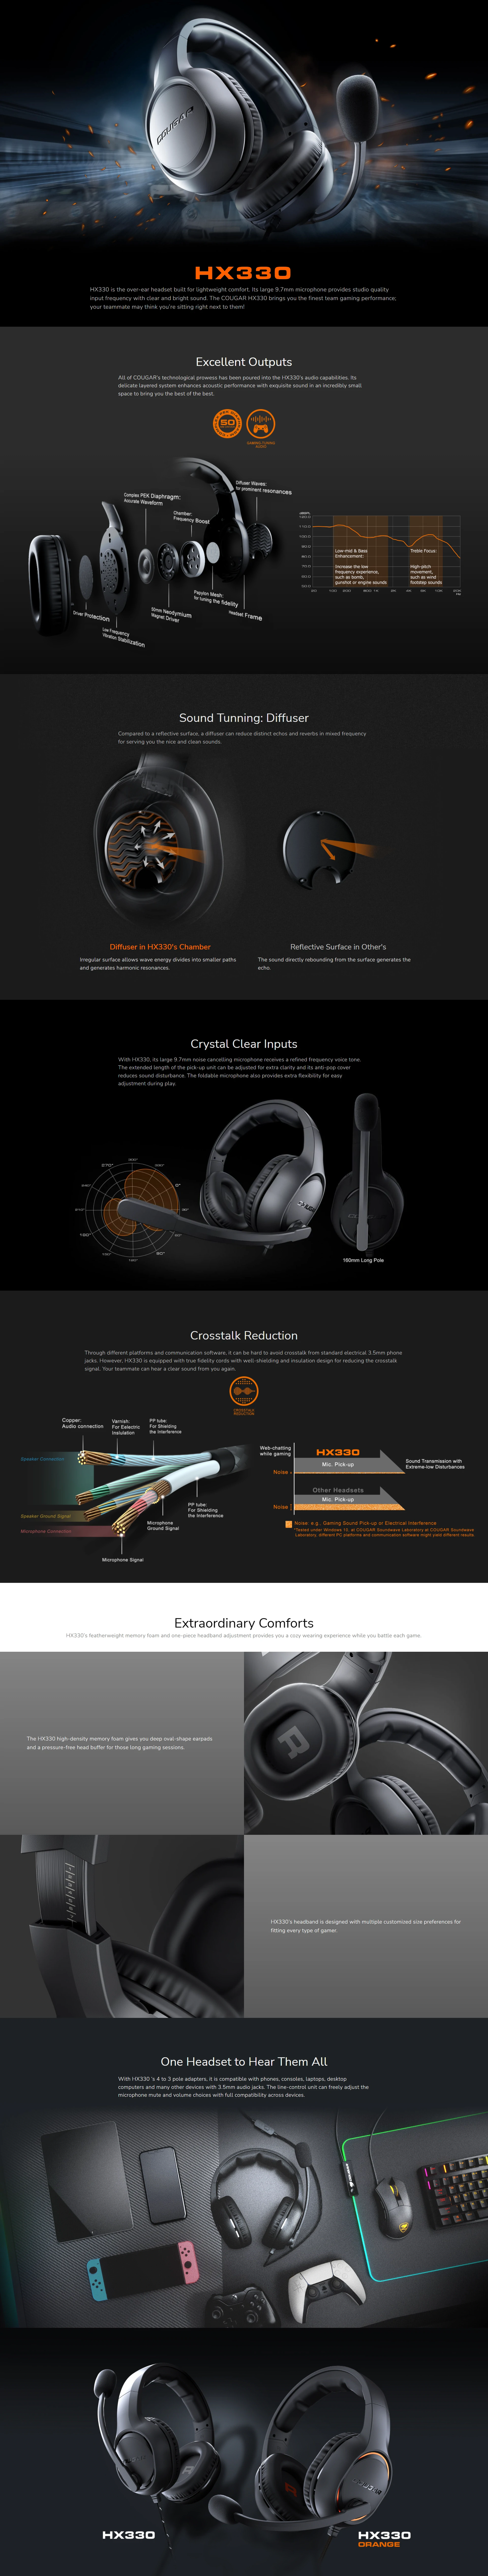 Overview - Cougar - HX330 Over-Ear Headset